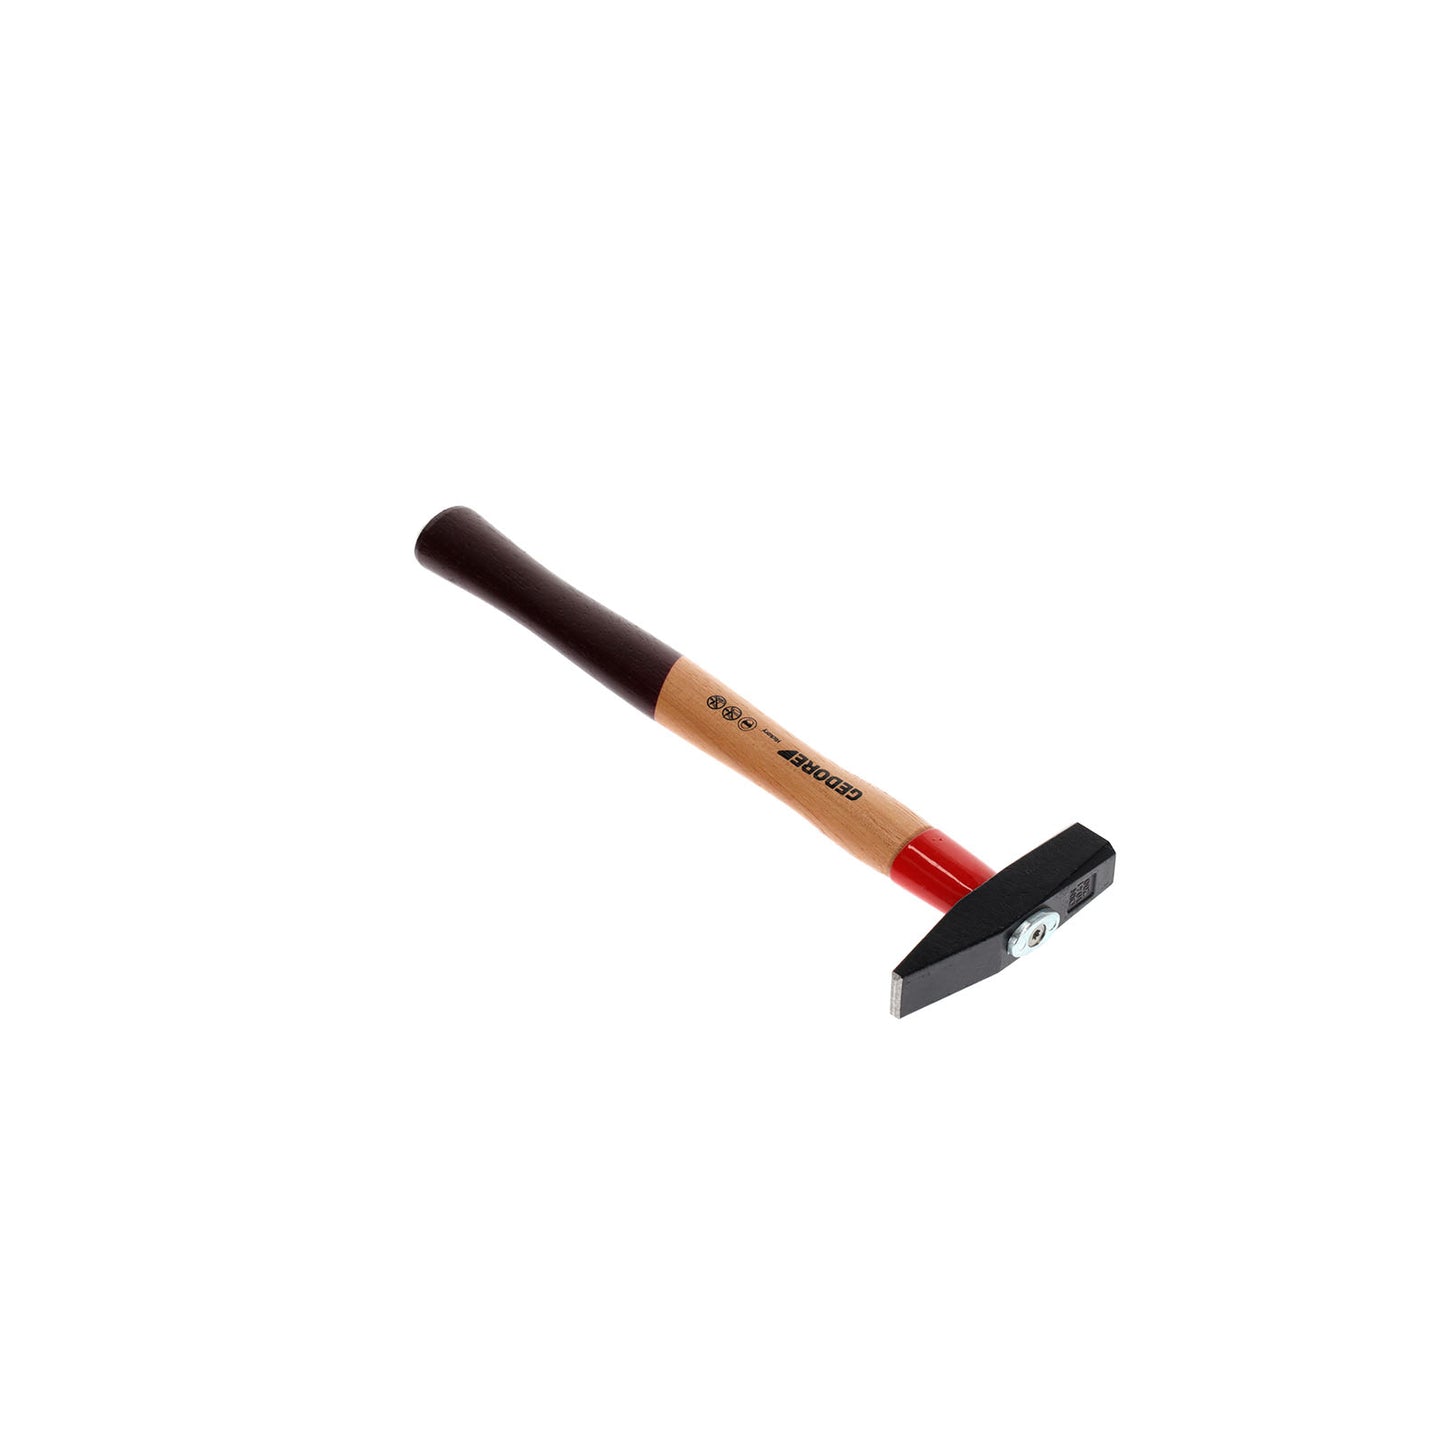 GEDORE 600 H-200 - ROTBAND assembly hammer 200g (8582930)